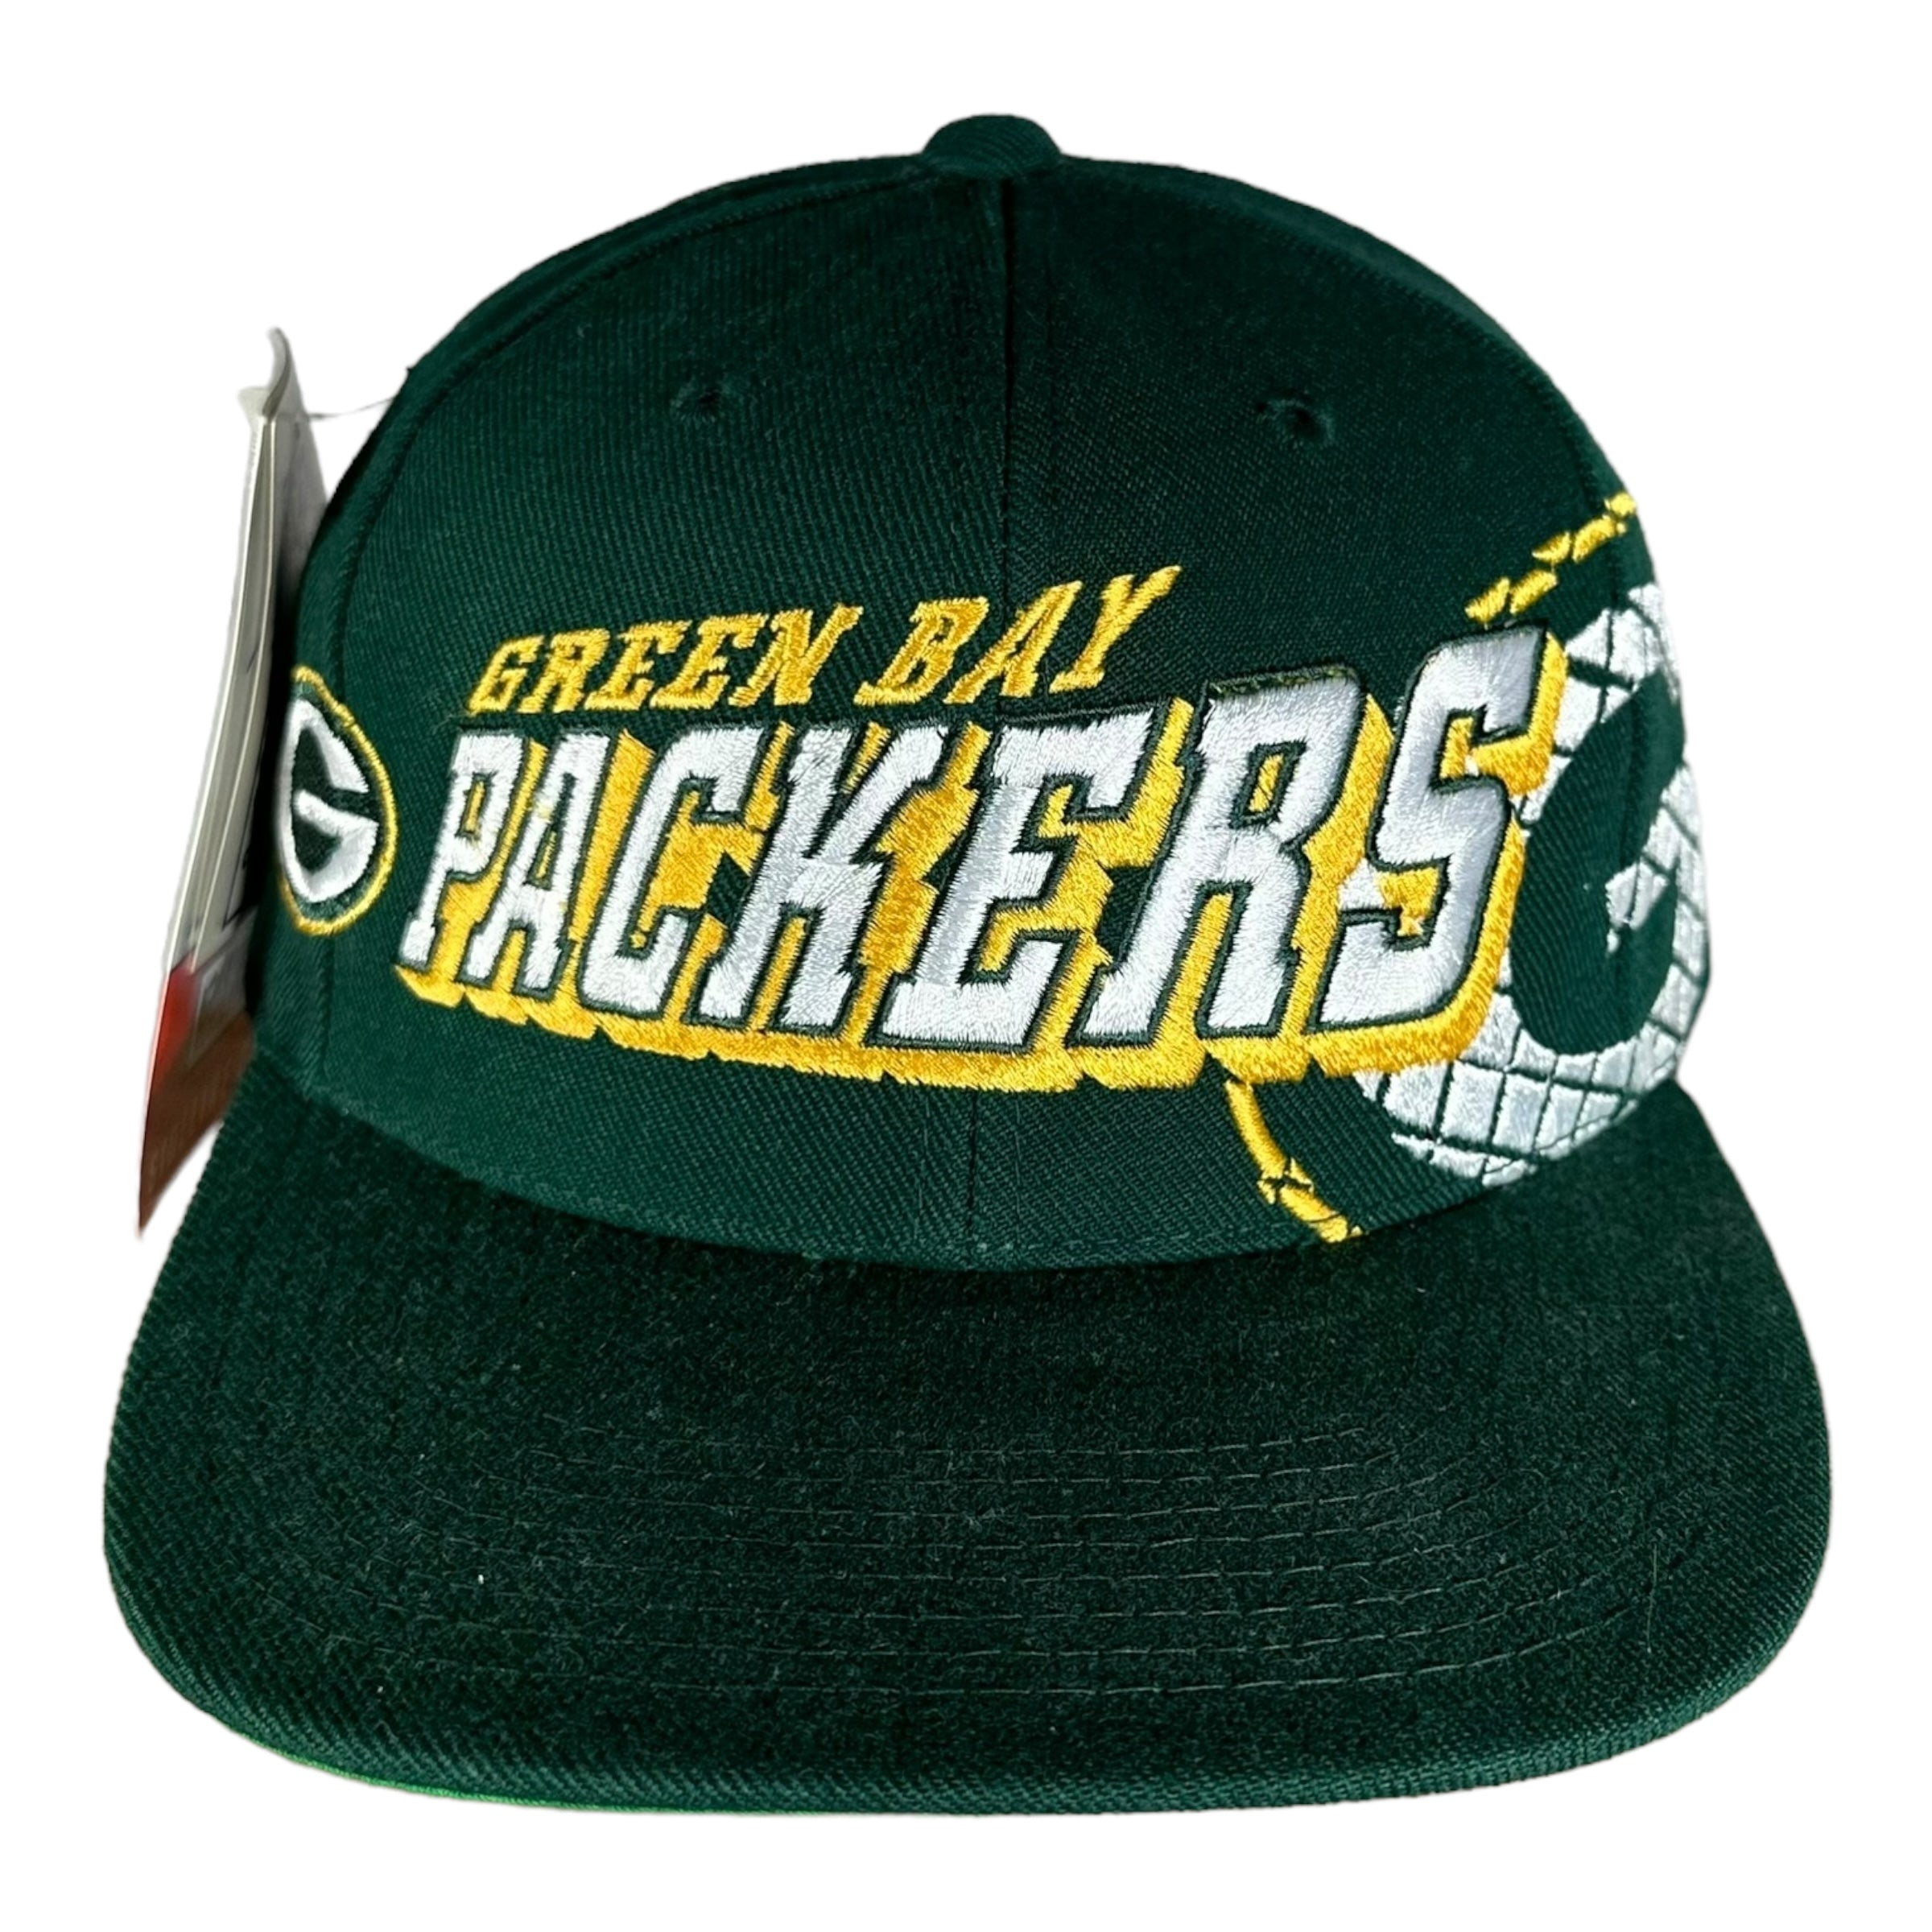 Vintage NWT NFL Green Bay Packers Sports Specialties Snapback